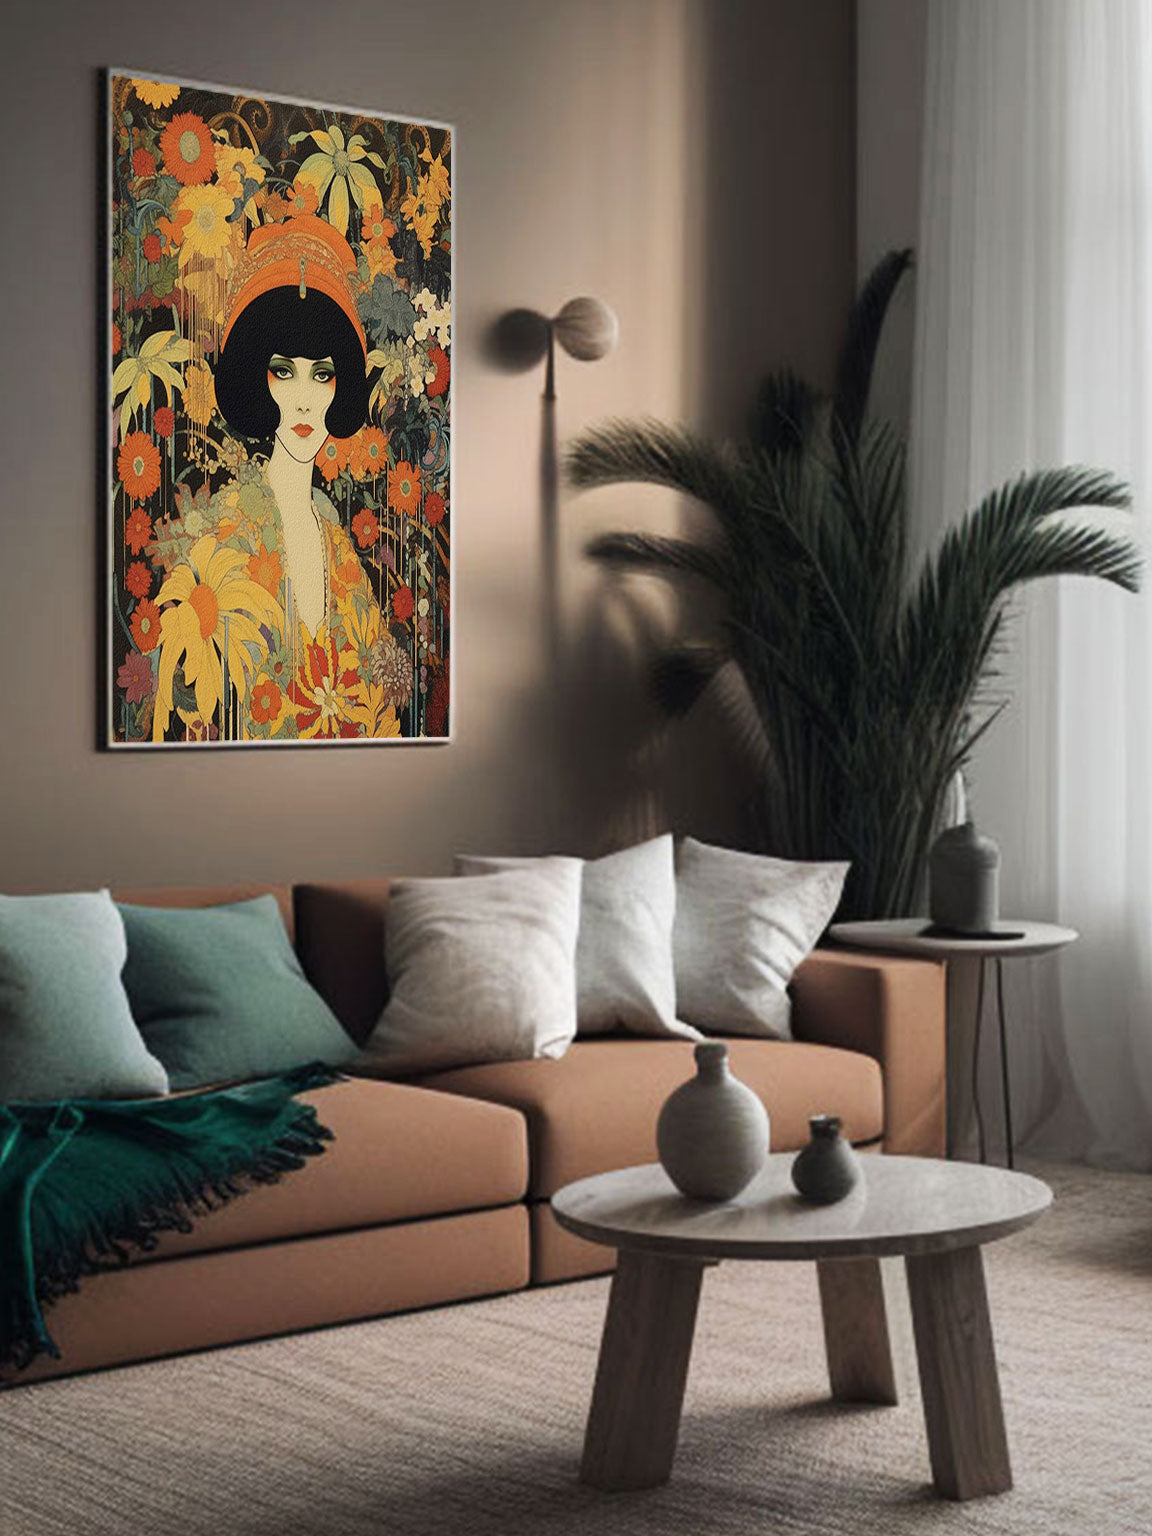 Interior Design reference photo to style Vintage Retro Art Style our art print Poster: Woman with Flowers in Orange Tones - Inspired by Art Deco, Fashion, and Classic Movies, Retro Glam Fashion Portrait, Modern Art Deco Print, Eclectic Punk Boho Decor, Vintage Flowers Wall Art, Interior Design, Moody Graphic Art, Bathroom Art, Living Room Wall Decor, Art for your Walls